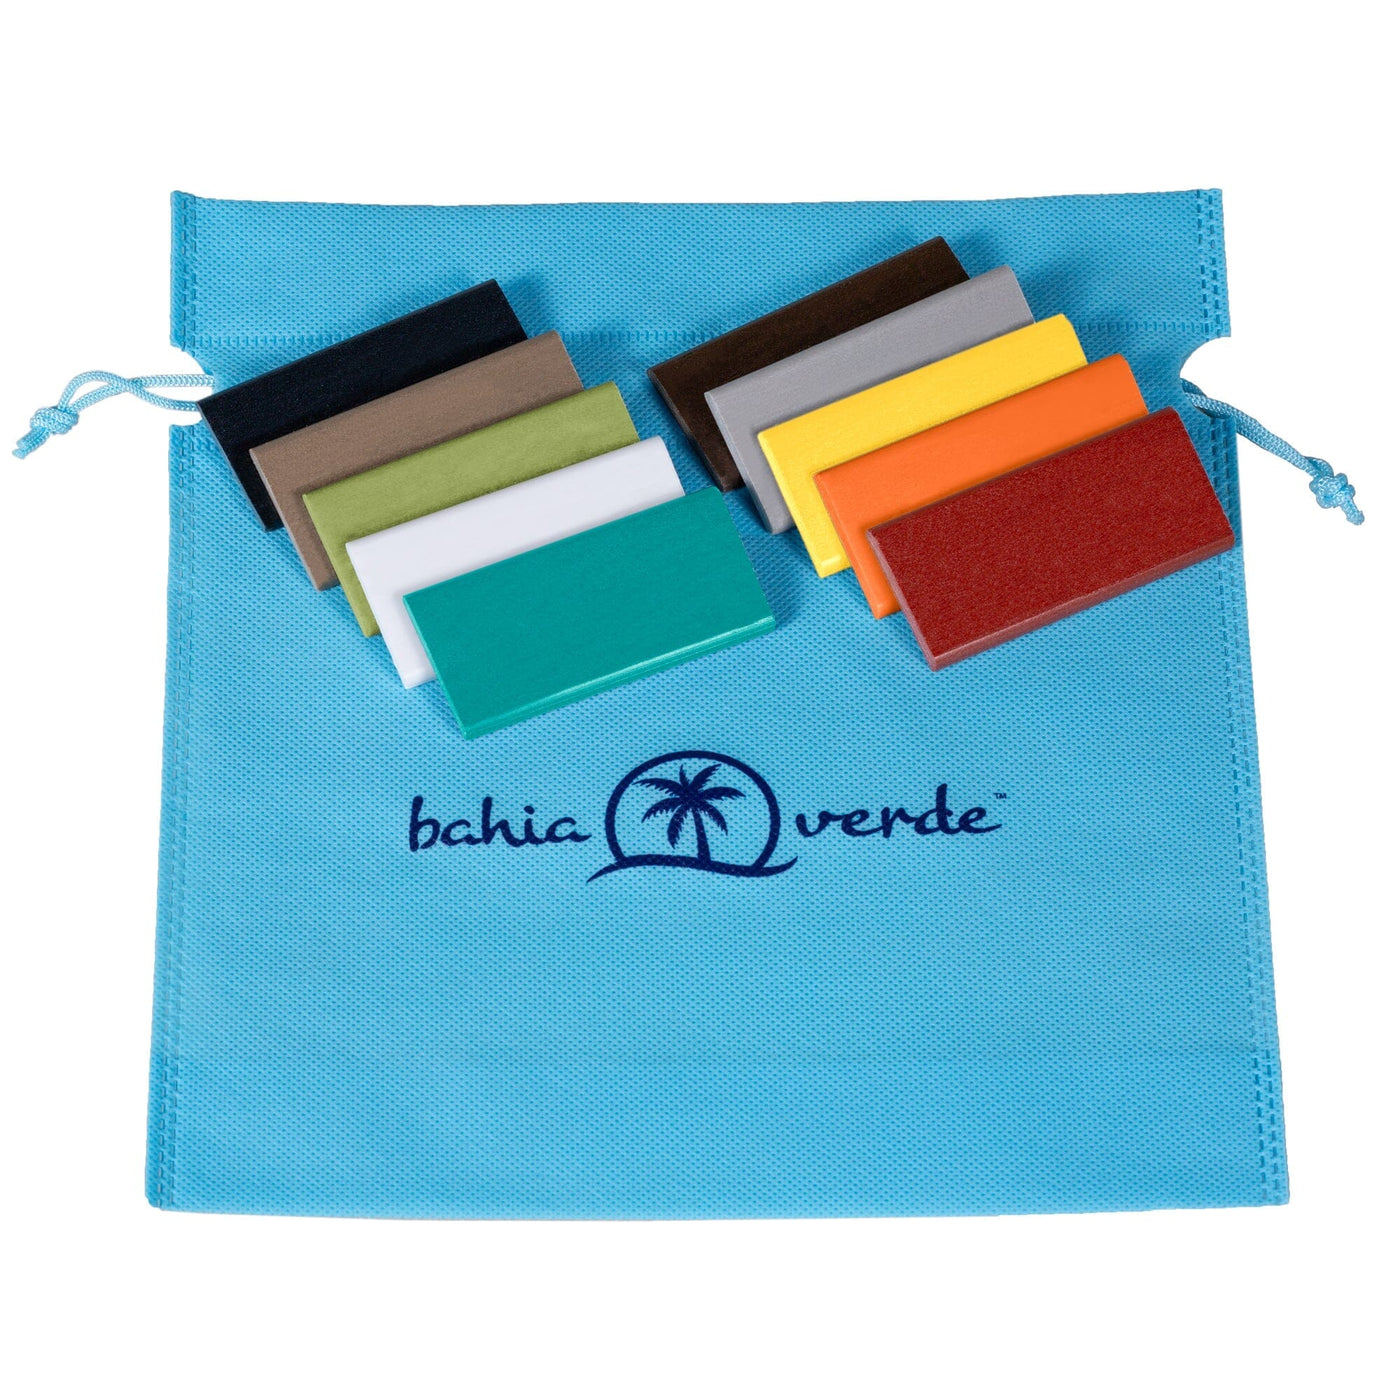 Product Swatches - Bahia Verde Product Swatches Bahia Verde Outdoors 